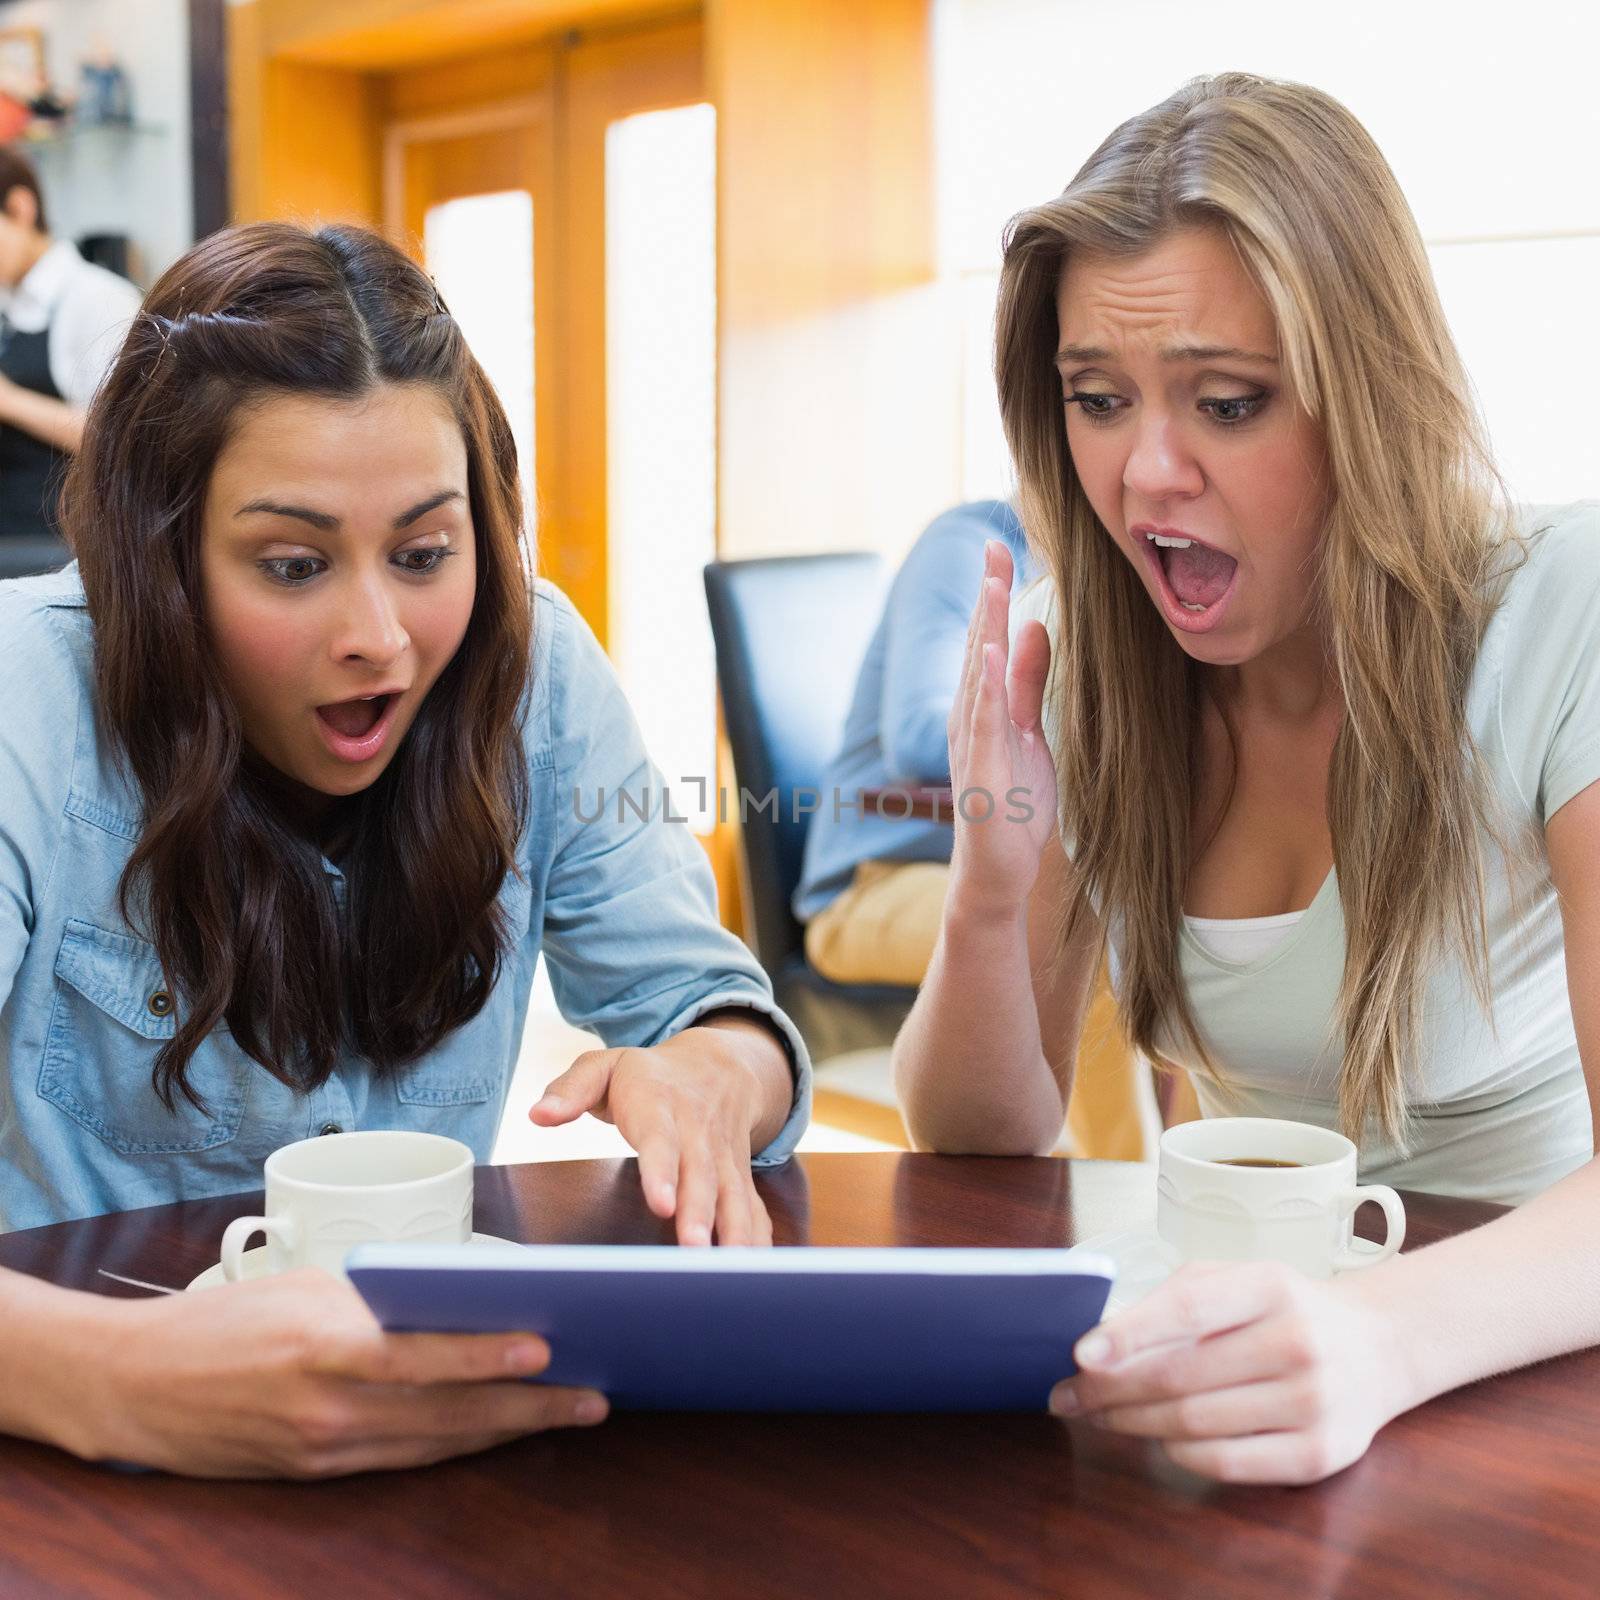 Students looking shocked at tablet pc in college canteen